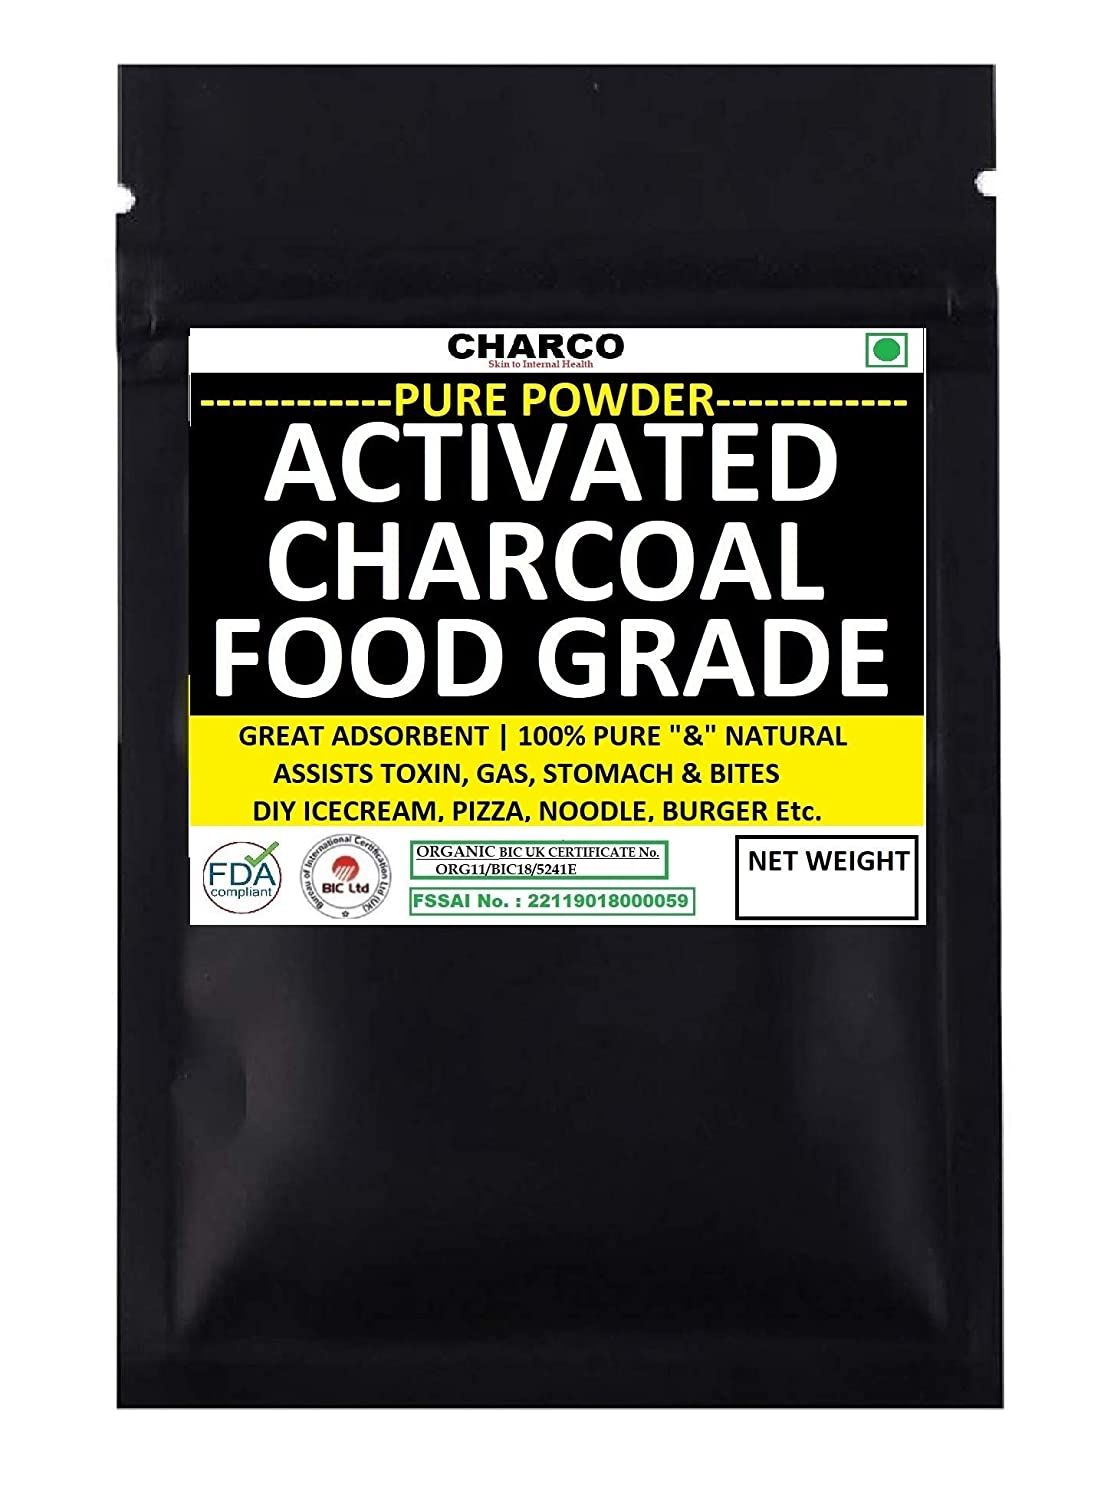 CHARCO Skin To Internal Health Activated Charcoal Powder Image